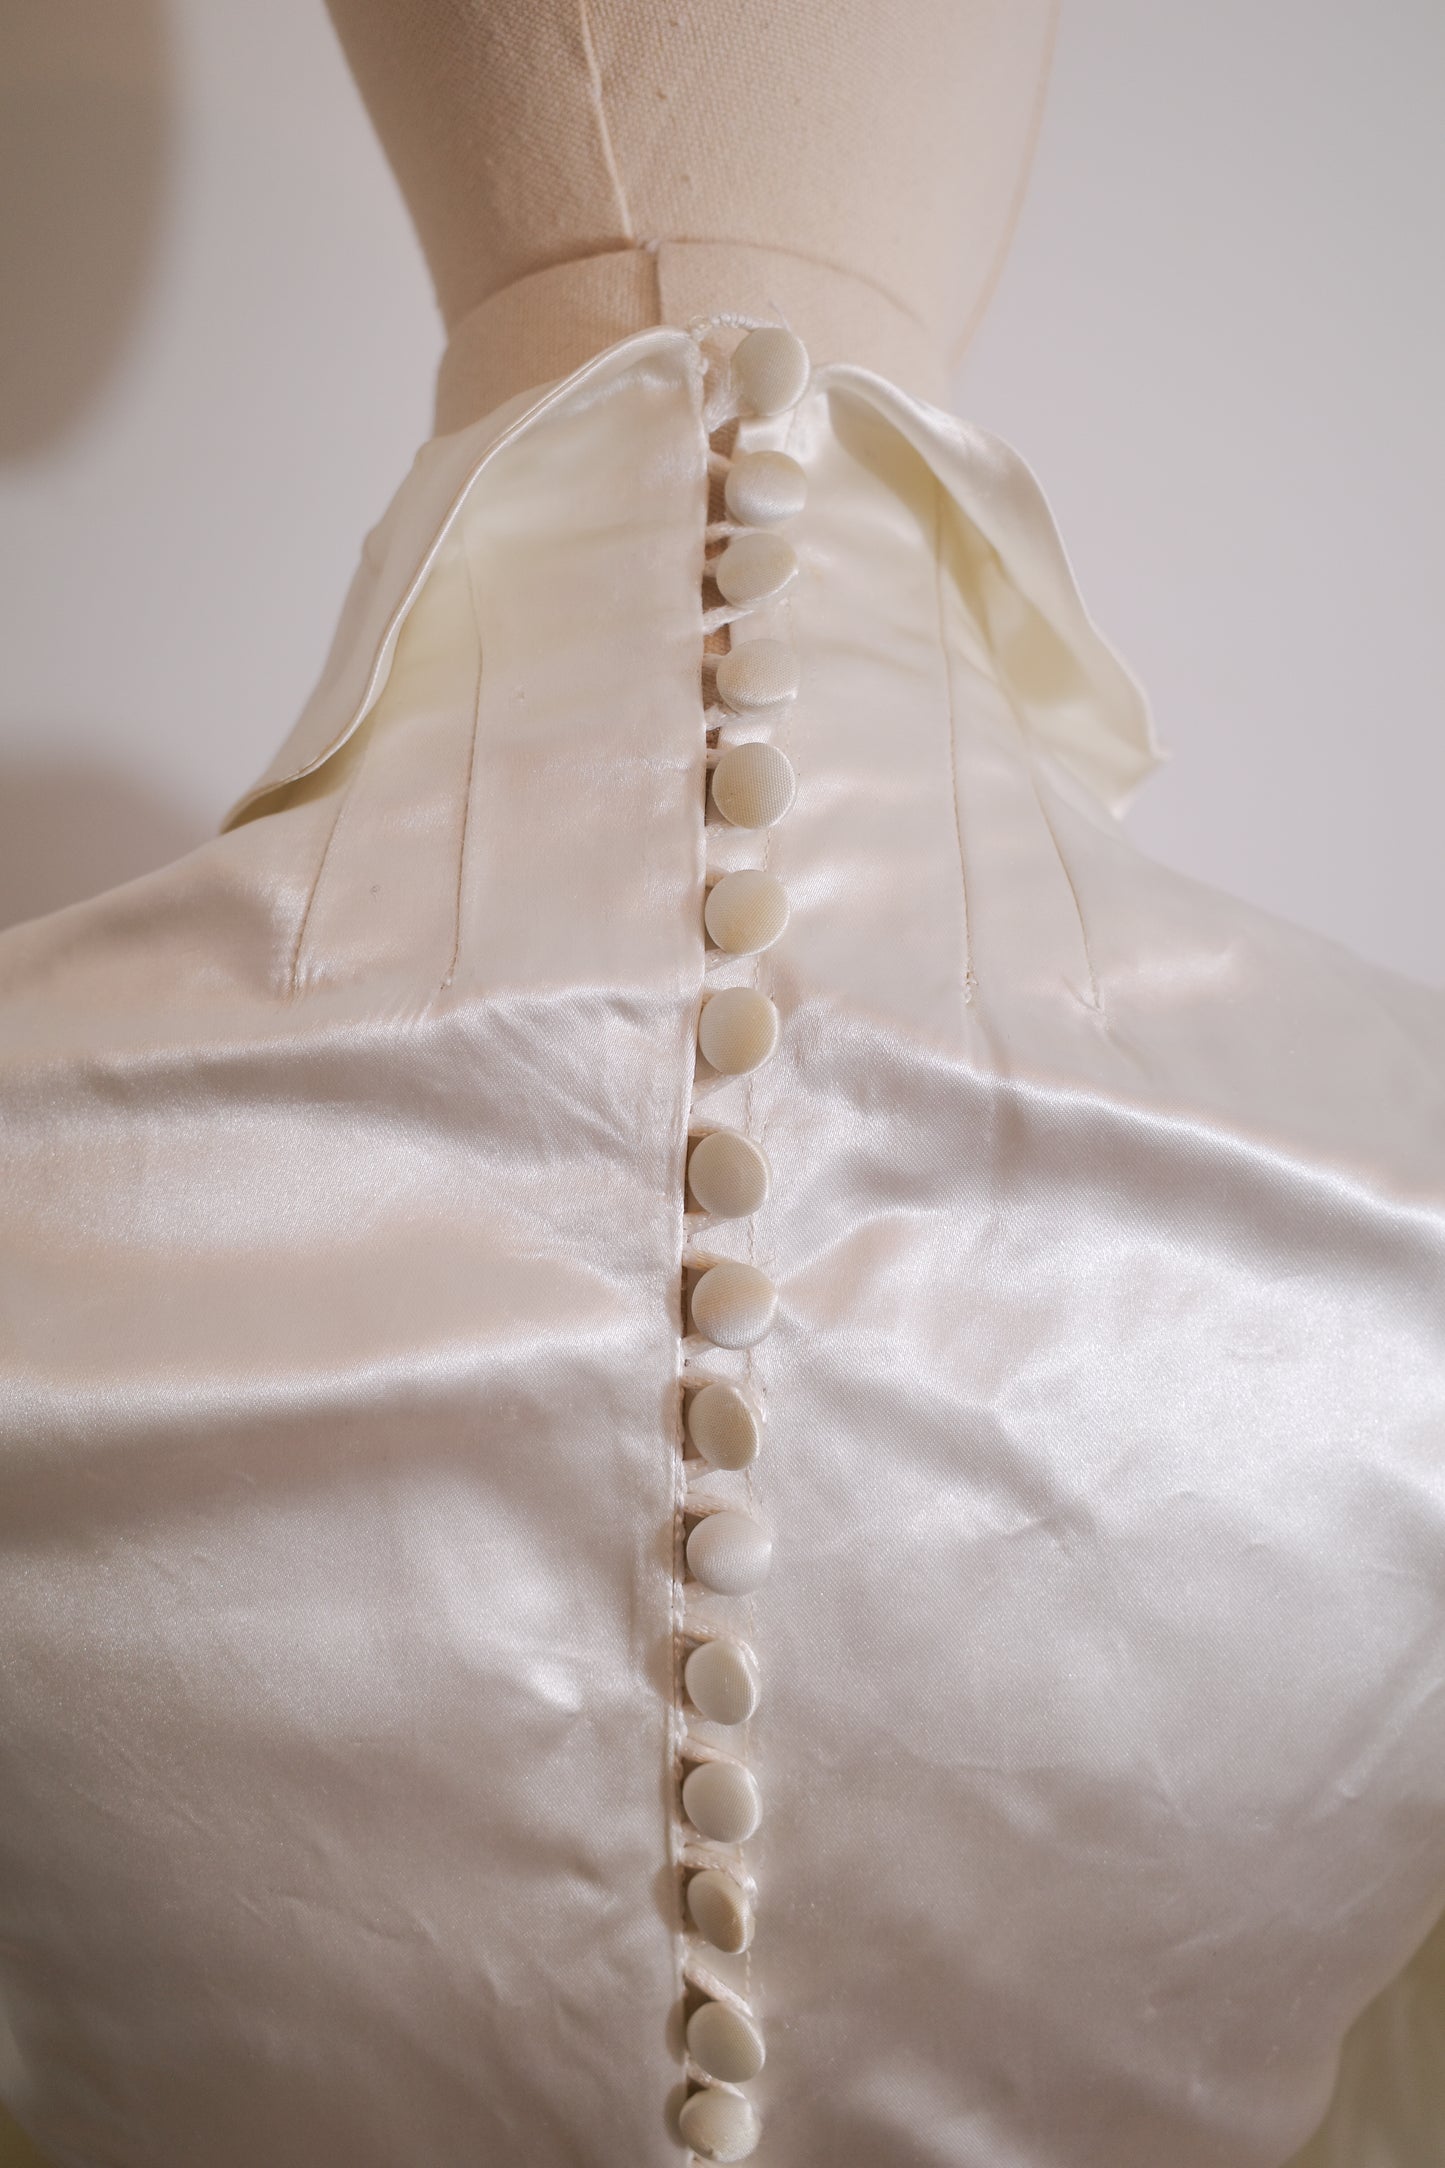 1930s Satin Wedding Dress  with Puff Sleeve and Full Train